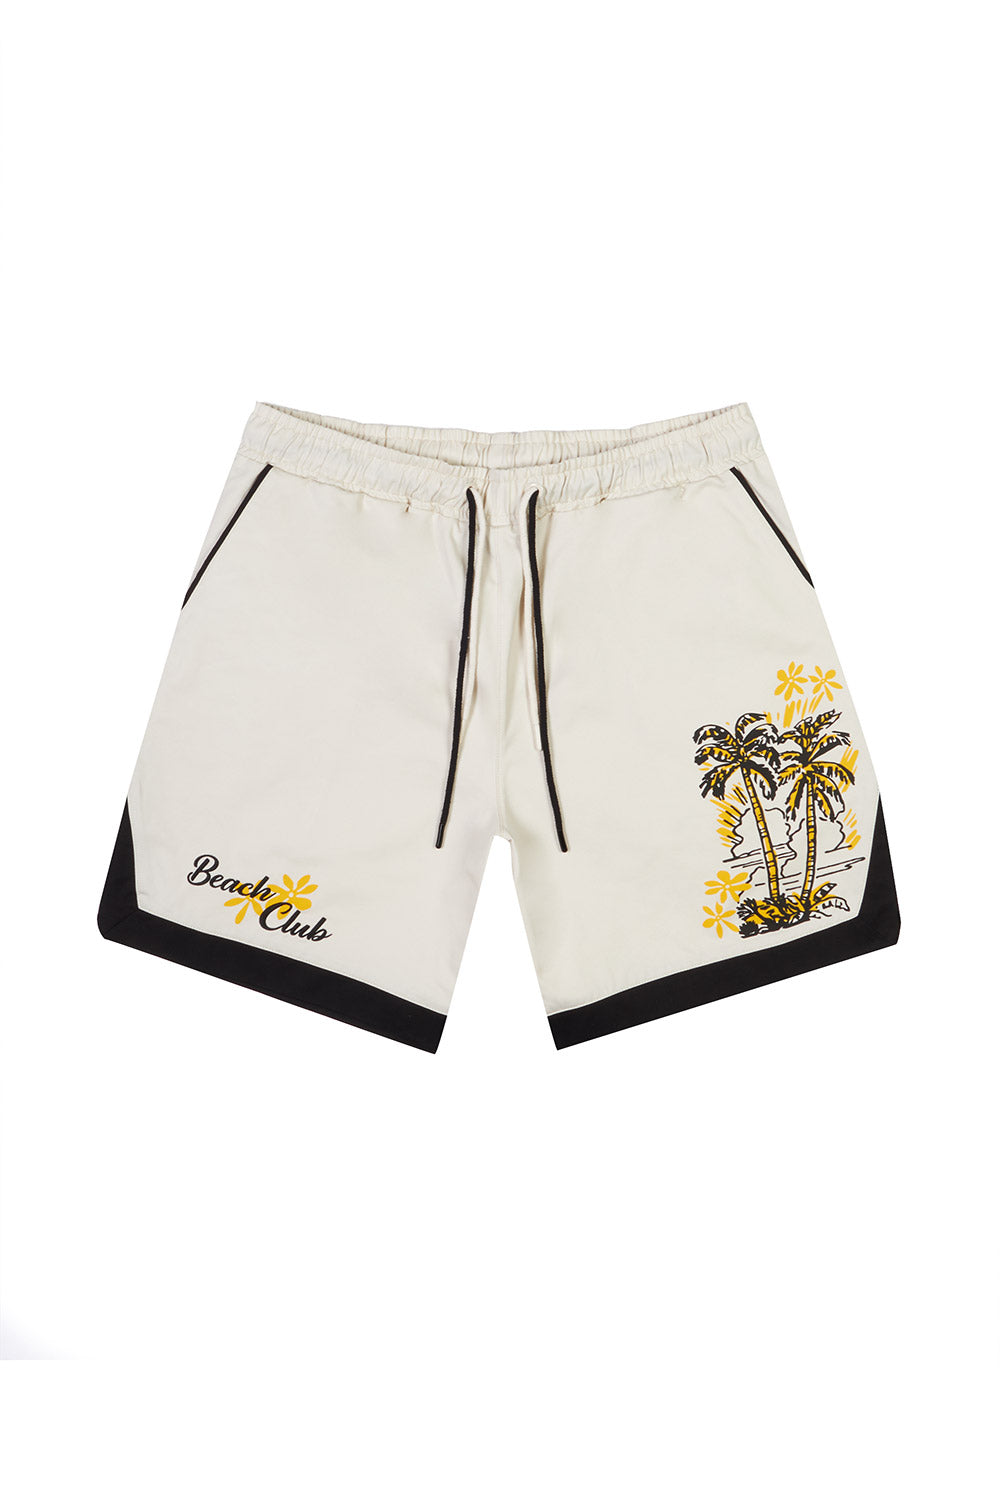 Embroidered & Printed Polished Twill Resort Shorts - Chalk